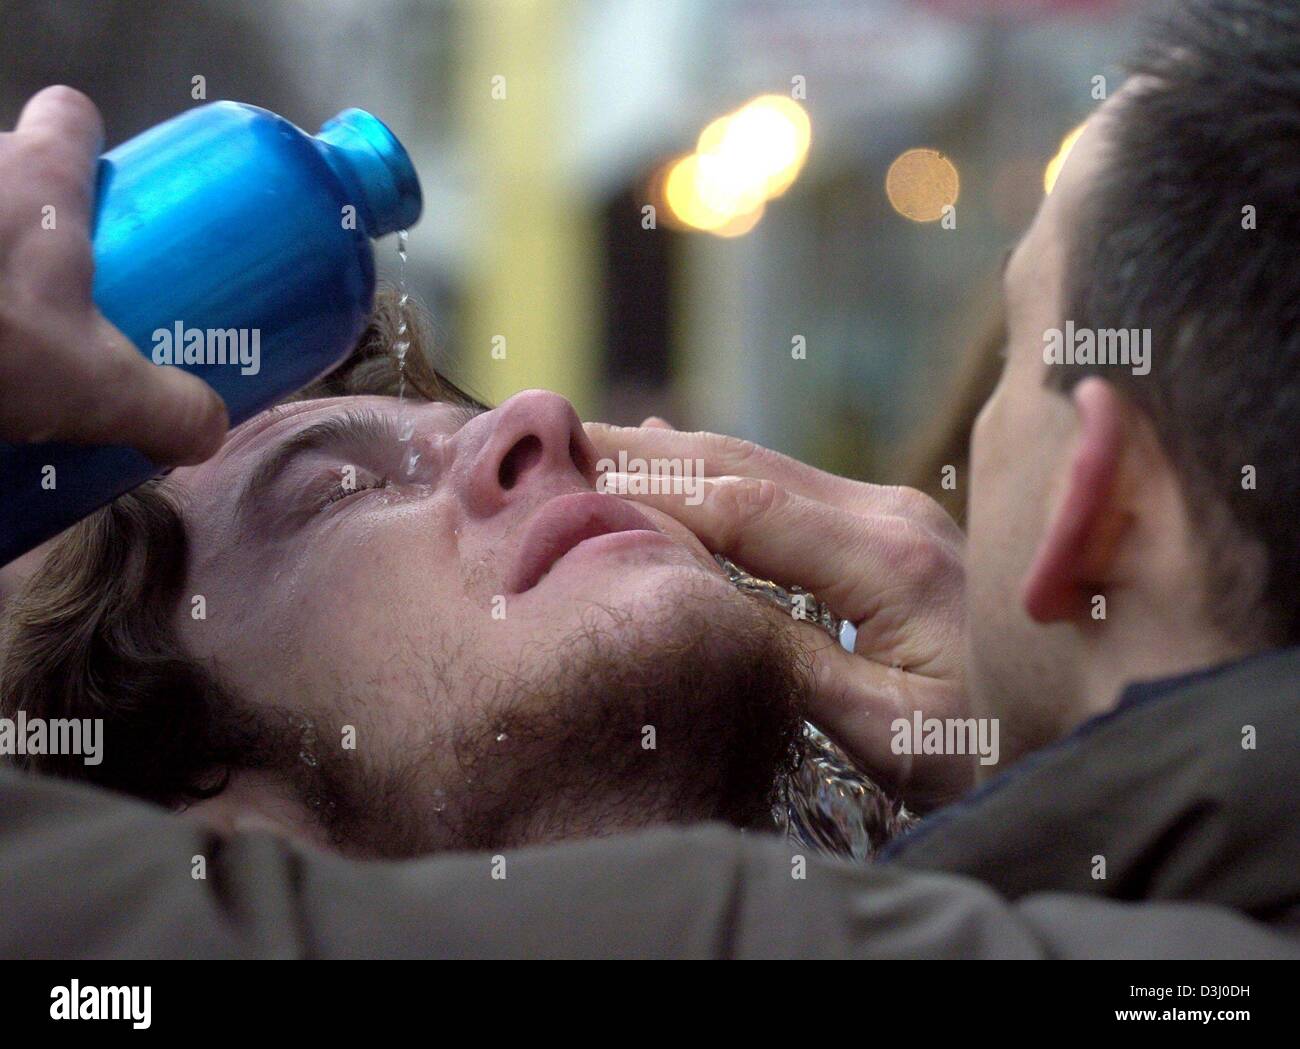 (dpa) - A protester washes out the eyes of a fellow protester with water  during a rally at the Berlin House of Representatives in Berlin, 15 January 2004. According to statements of witnesses, police had cornered some protesters in a backyard and used teargas on them. Around 1,000 protesters gathered for a rally at the Berlin House of Representatives in order to voice their protes Stock Photo